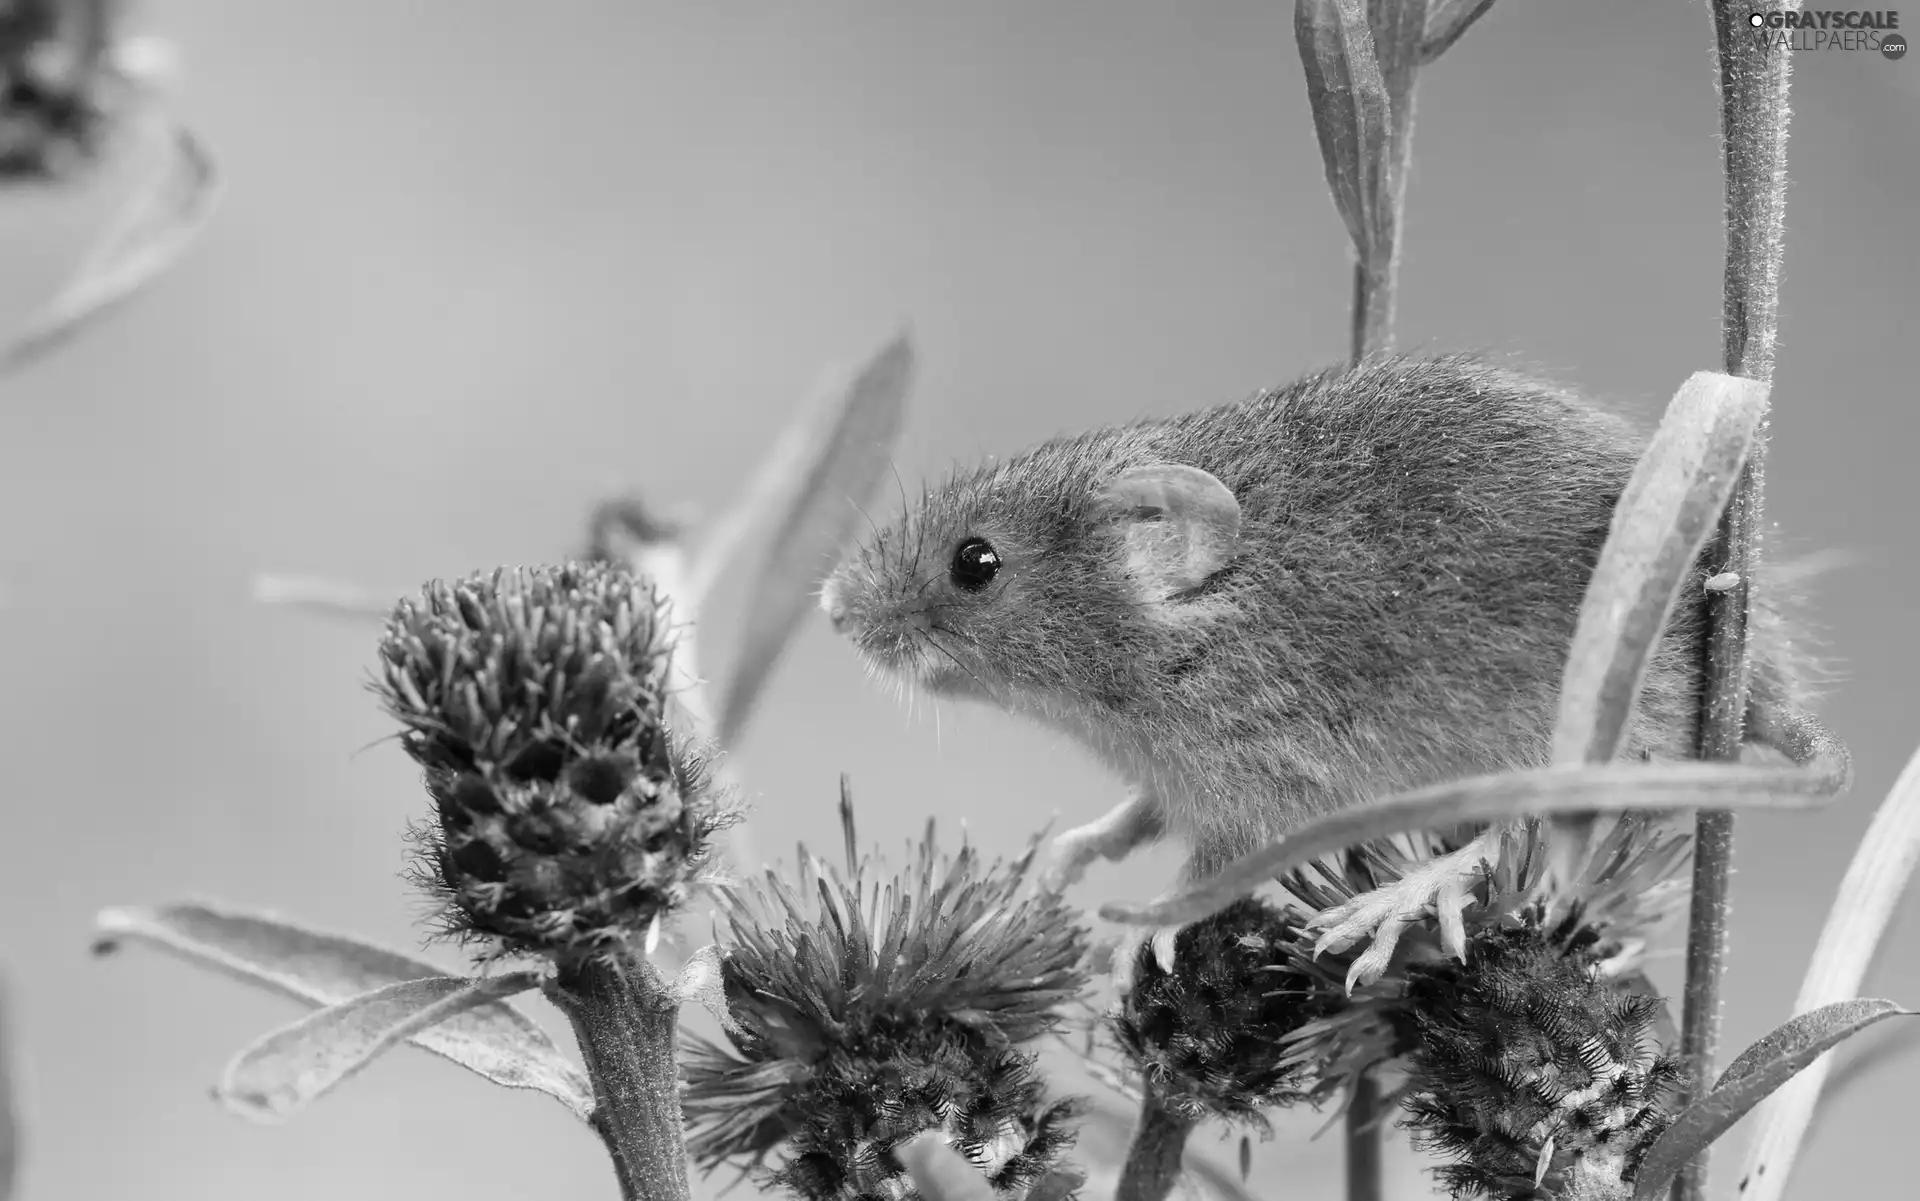 thistle, mouse, inflorescence